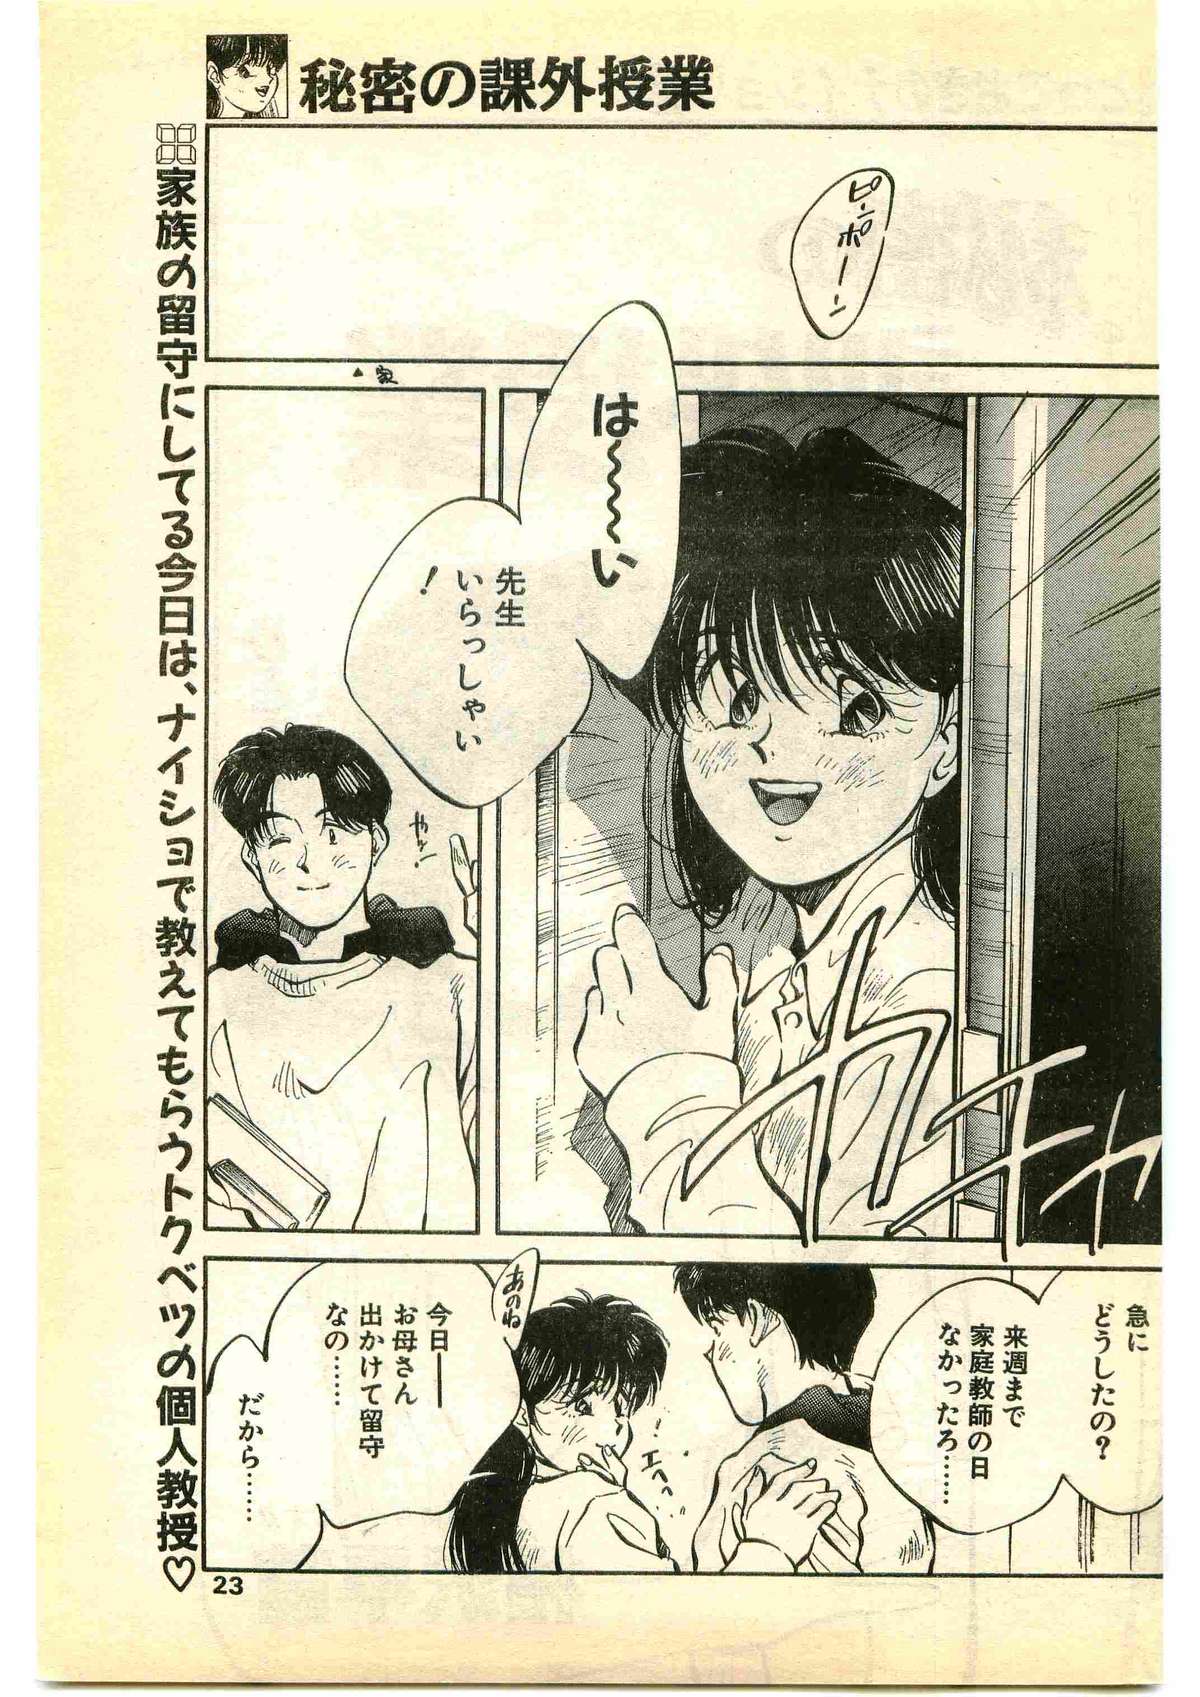 COMIC Papipo Gaiden 1995-01 page 23 full